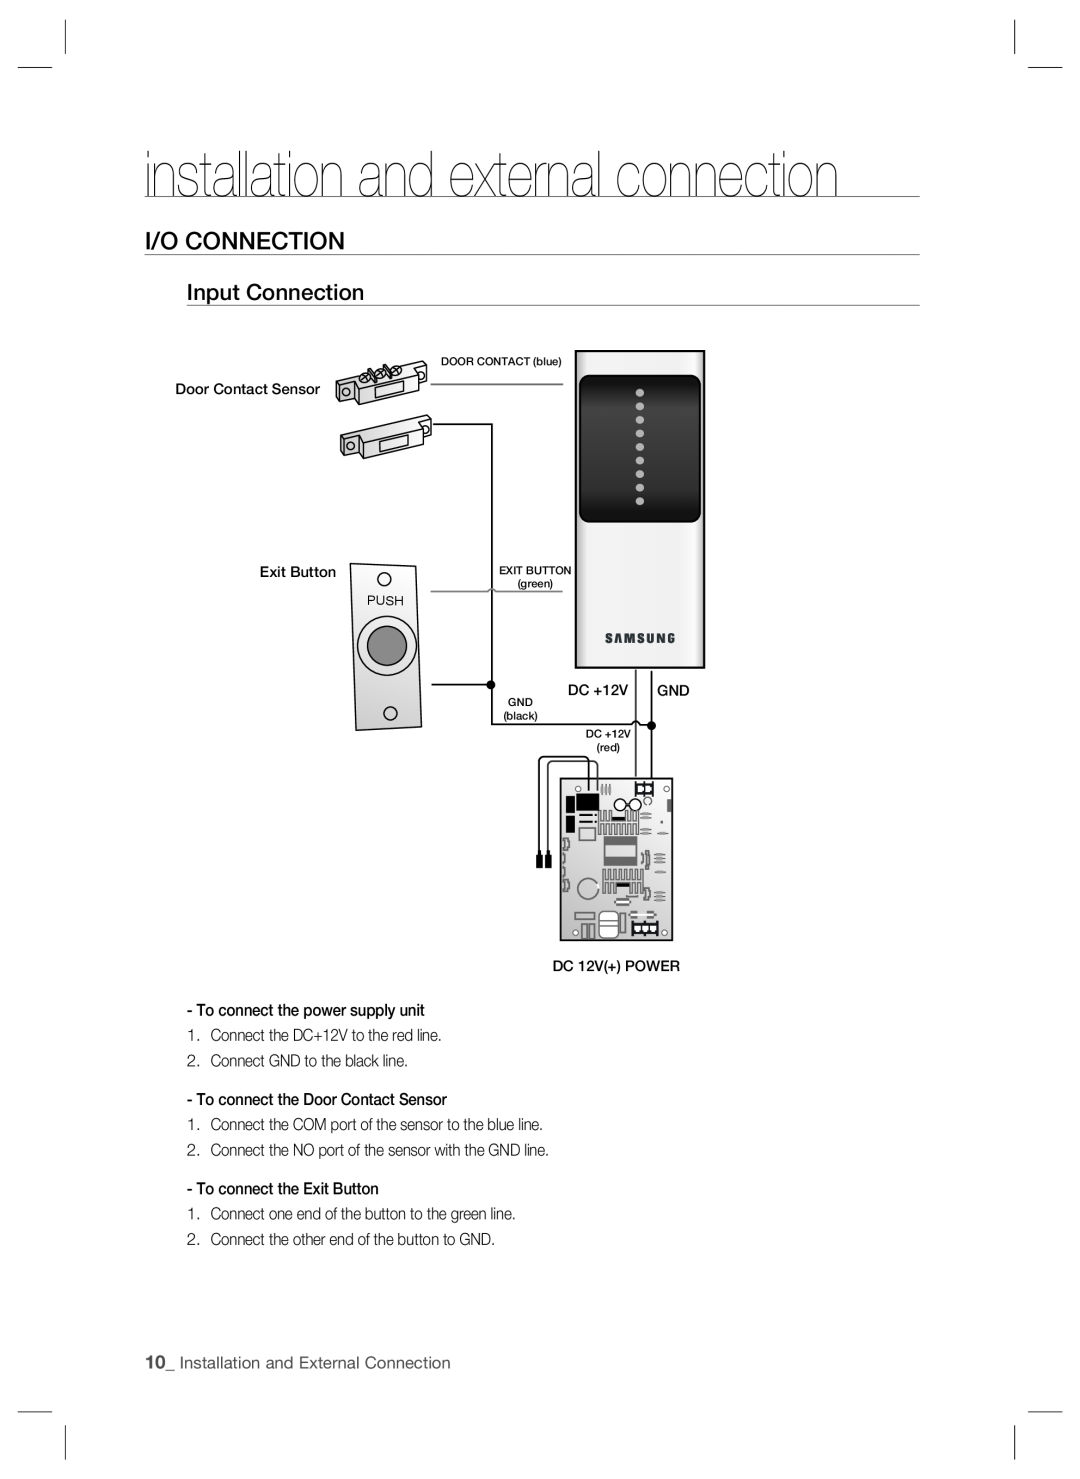 Samsung SSA-S1000 I/O Connection, installation and external connection, 10_ Installation and External Connection 